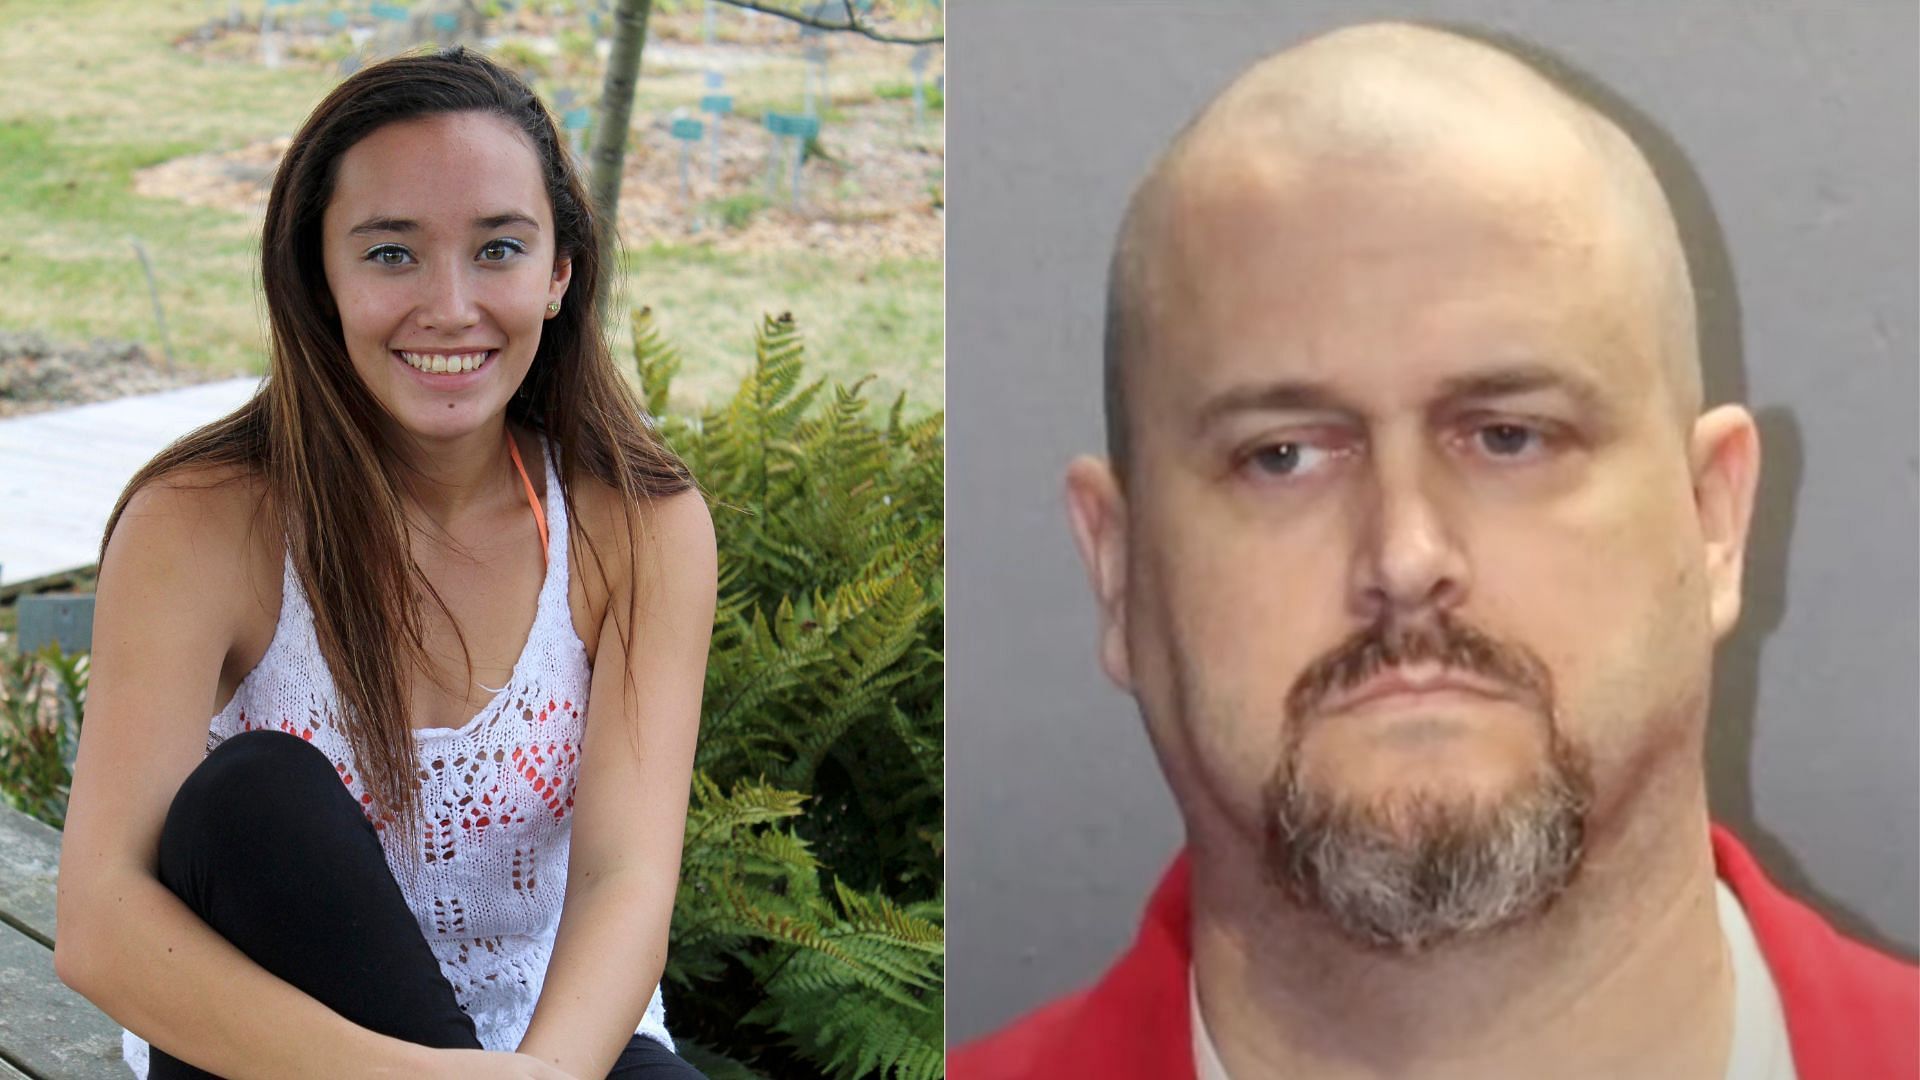 Anjelica &quot;AJ&quot; Hadsell&#039;s step-father, Wesley Hadsell was found guilty of murdering the 18-year-old (Image via @savethename/Twitter, 13News Now/YouTube)